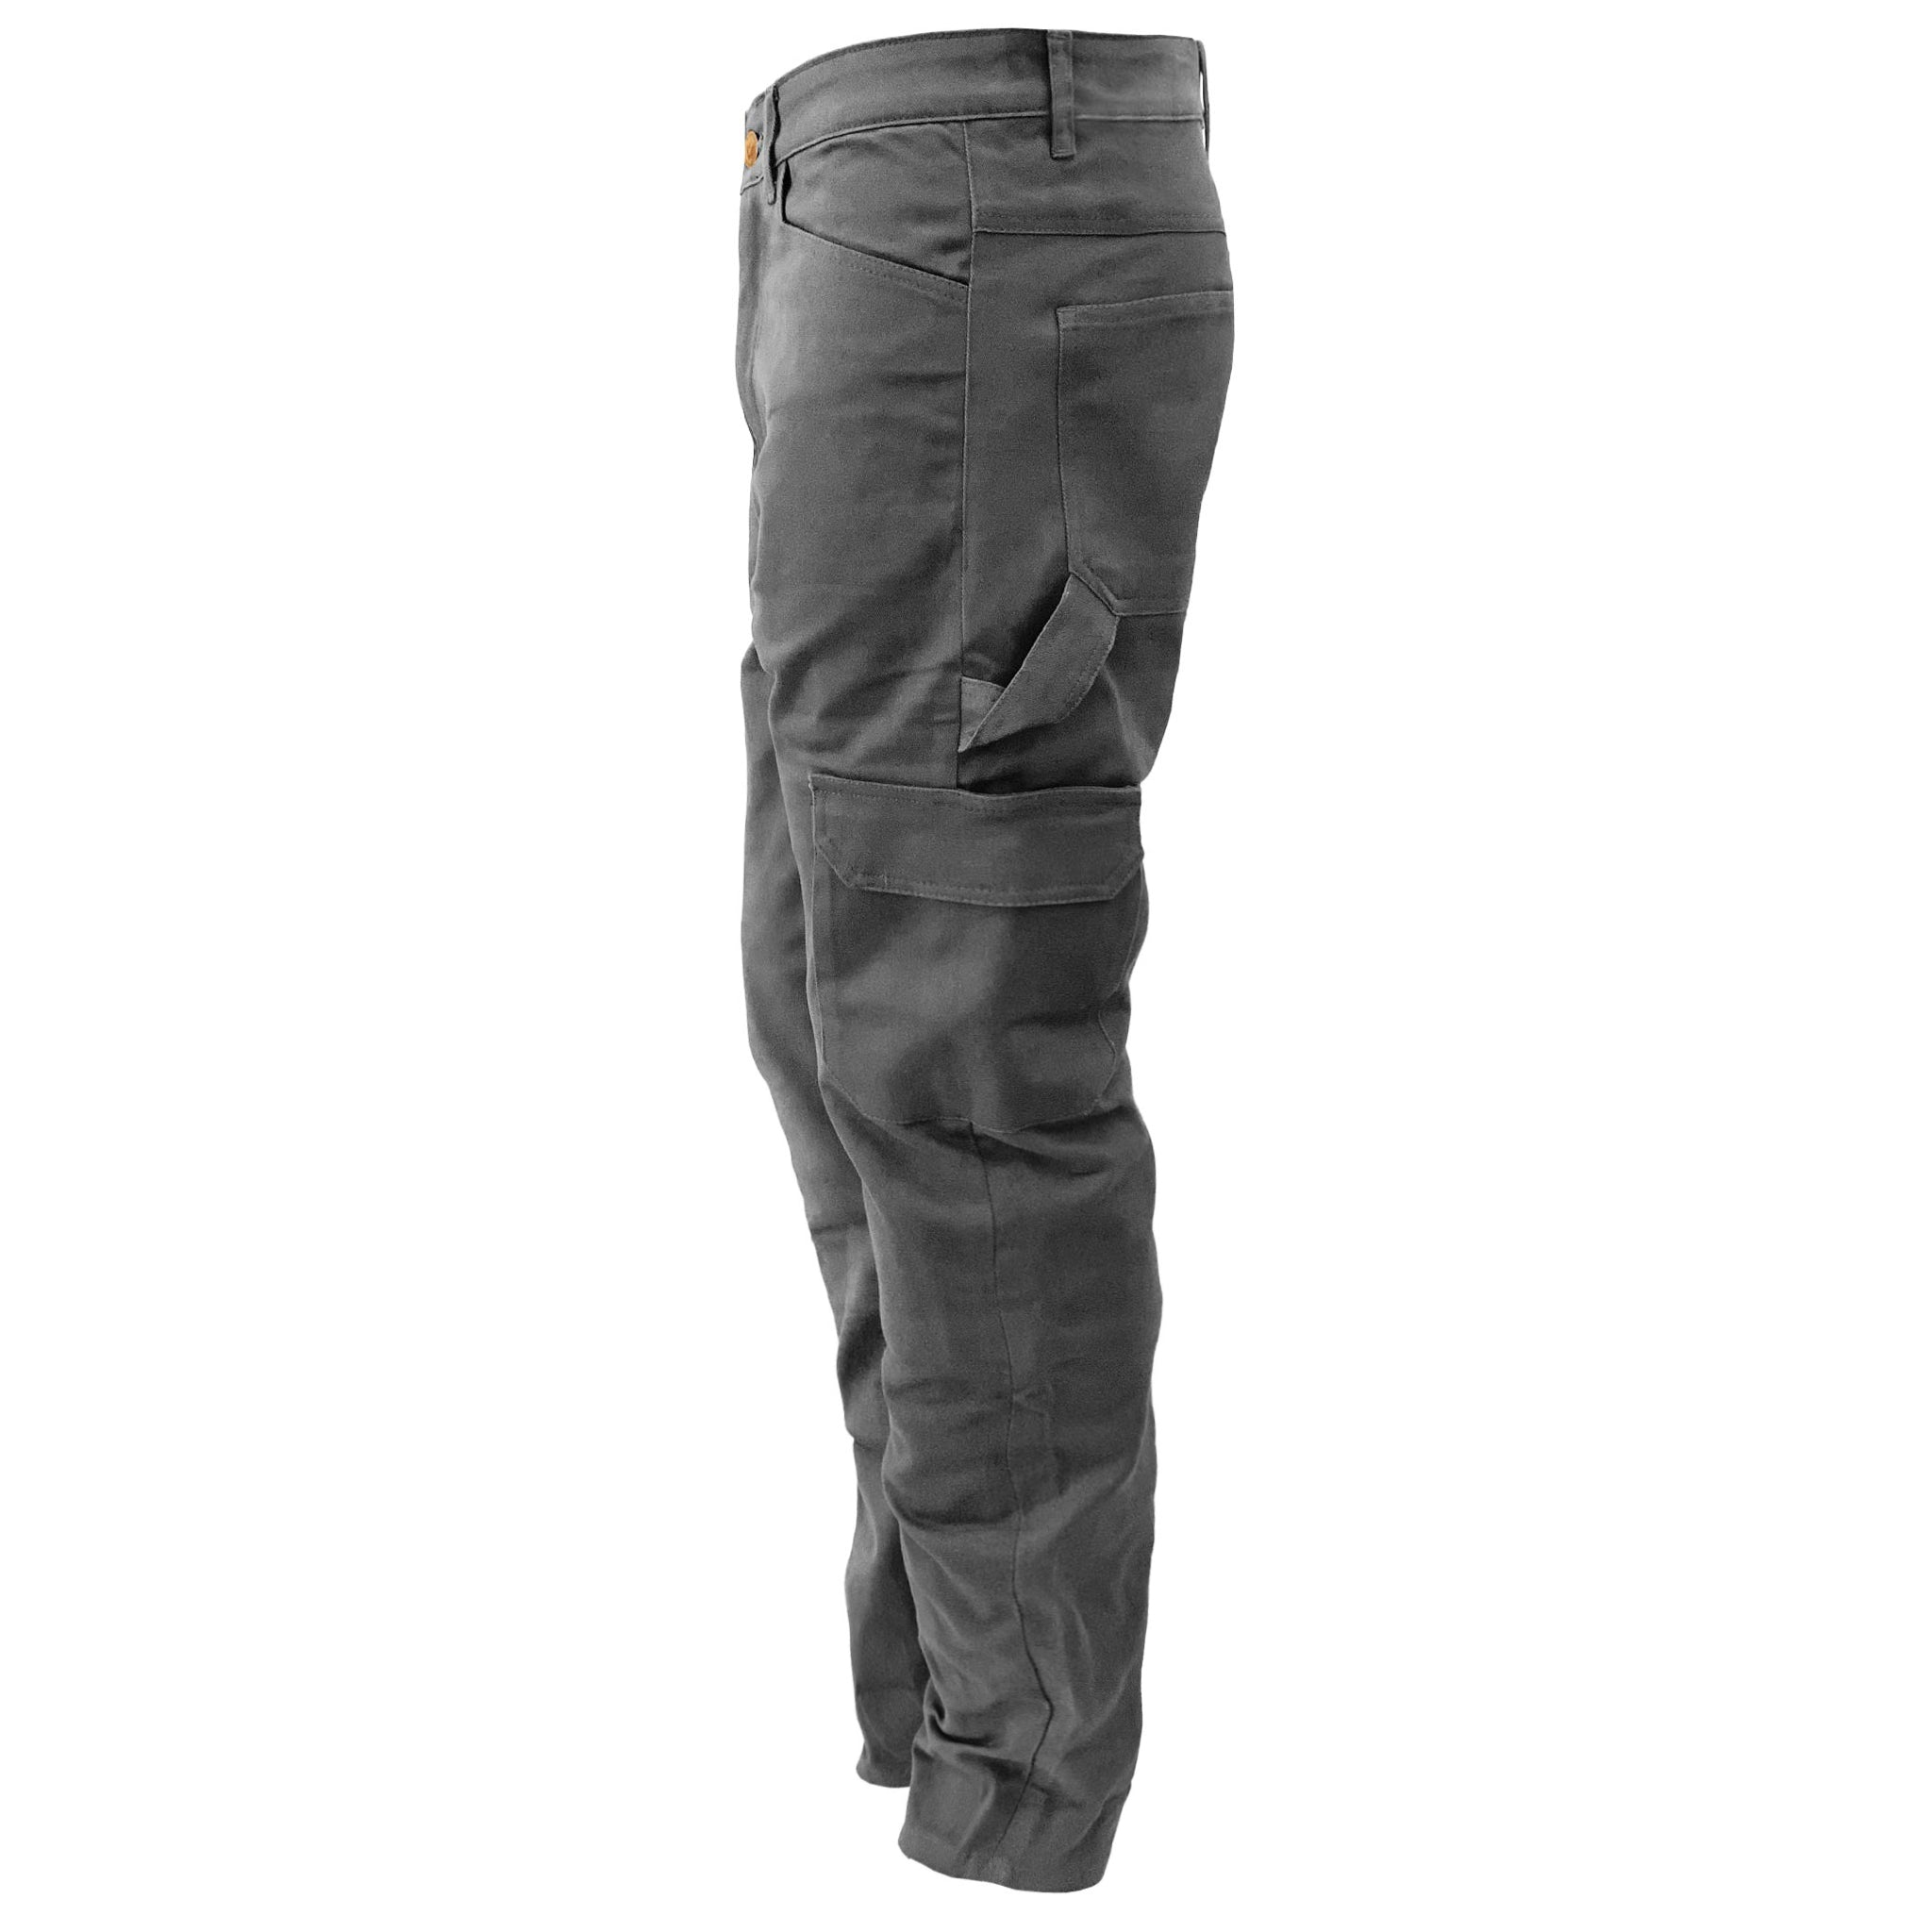 SALE Relaxed Fit Cargo Pants - Grey with Pads